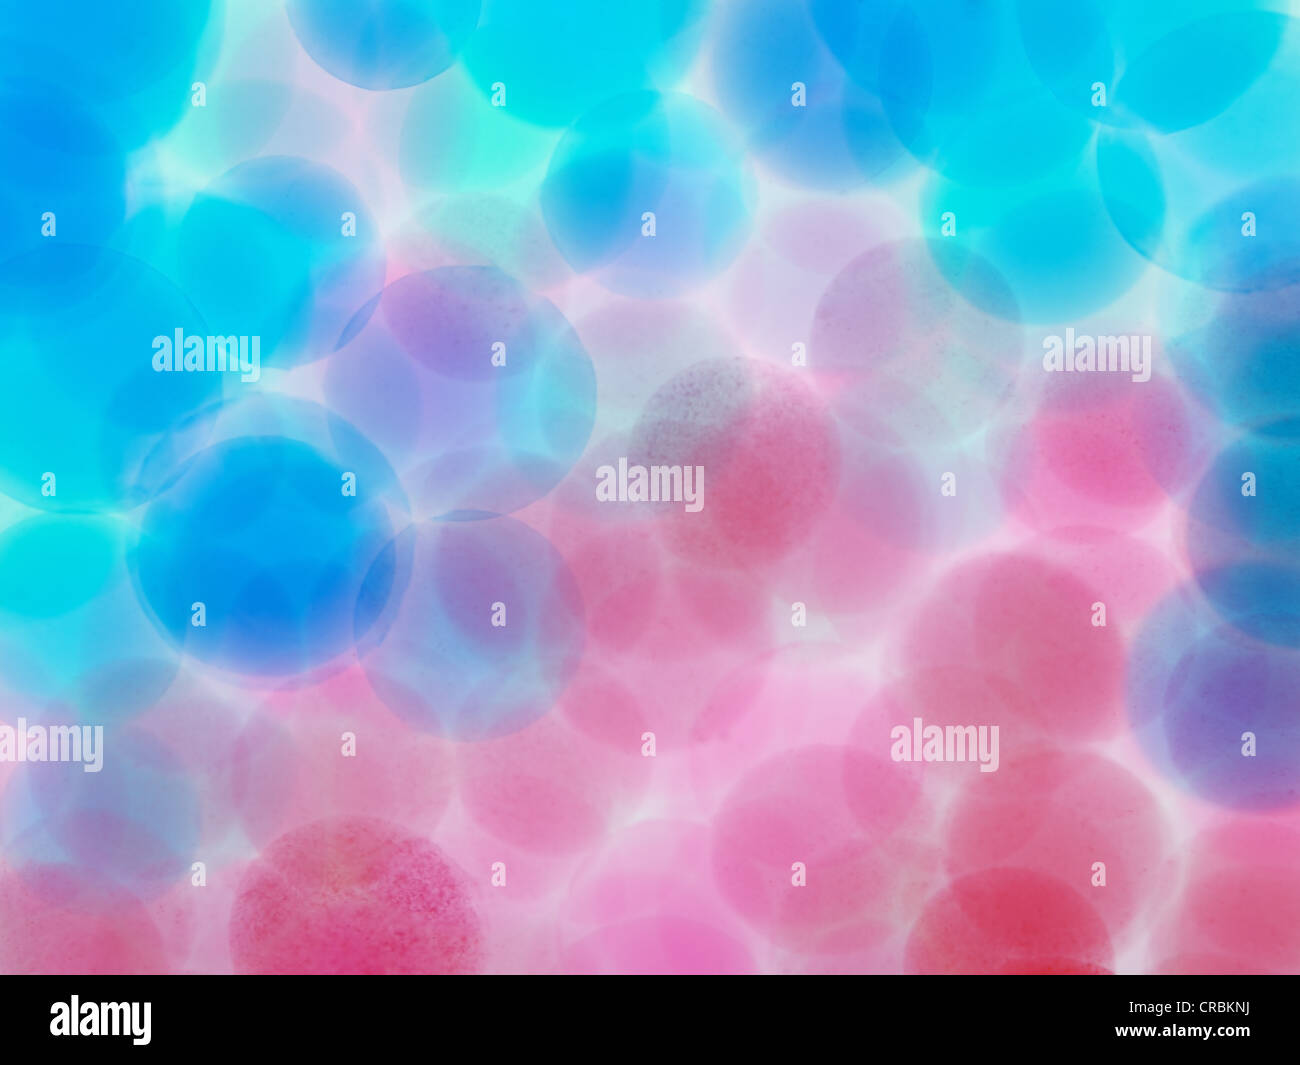 microscopic pink and blue balls in the water Stock Photo